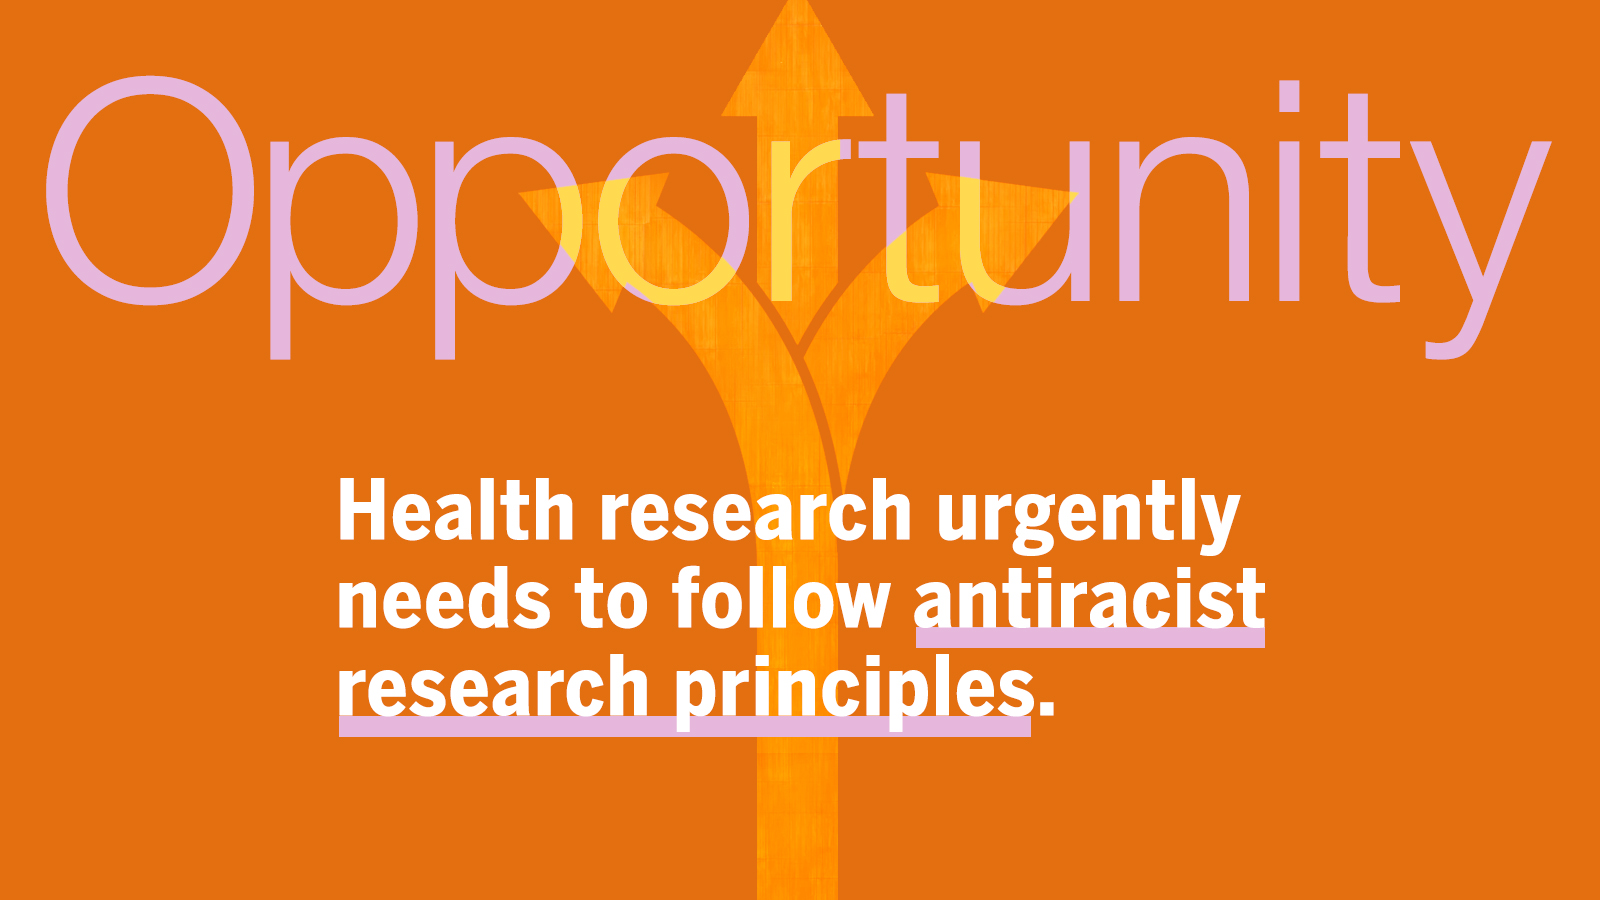 Opportunity: Health research urgently needs to follow antiracist research principles.